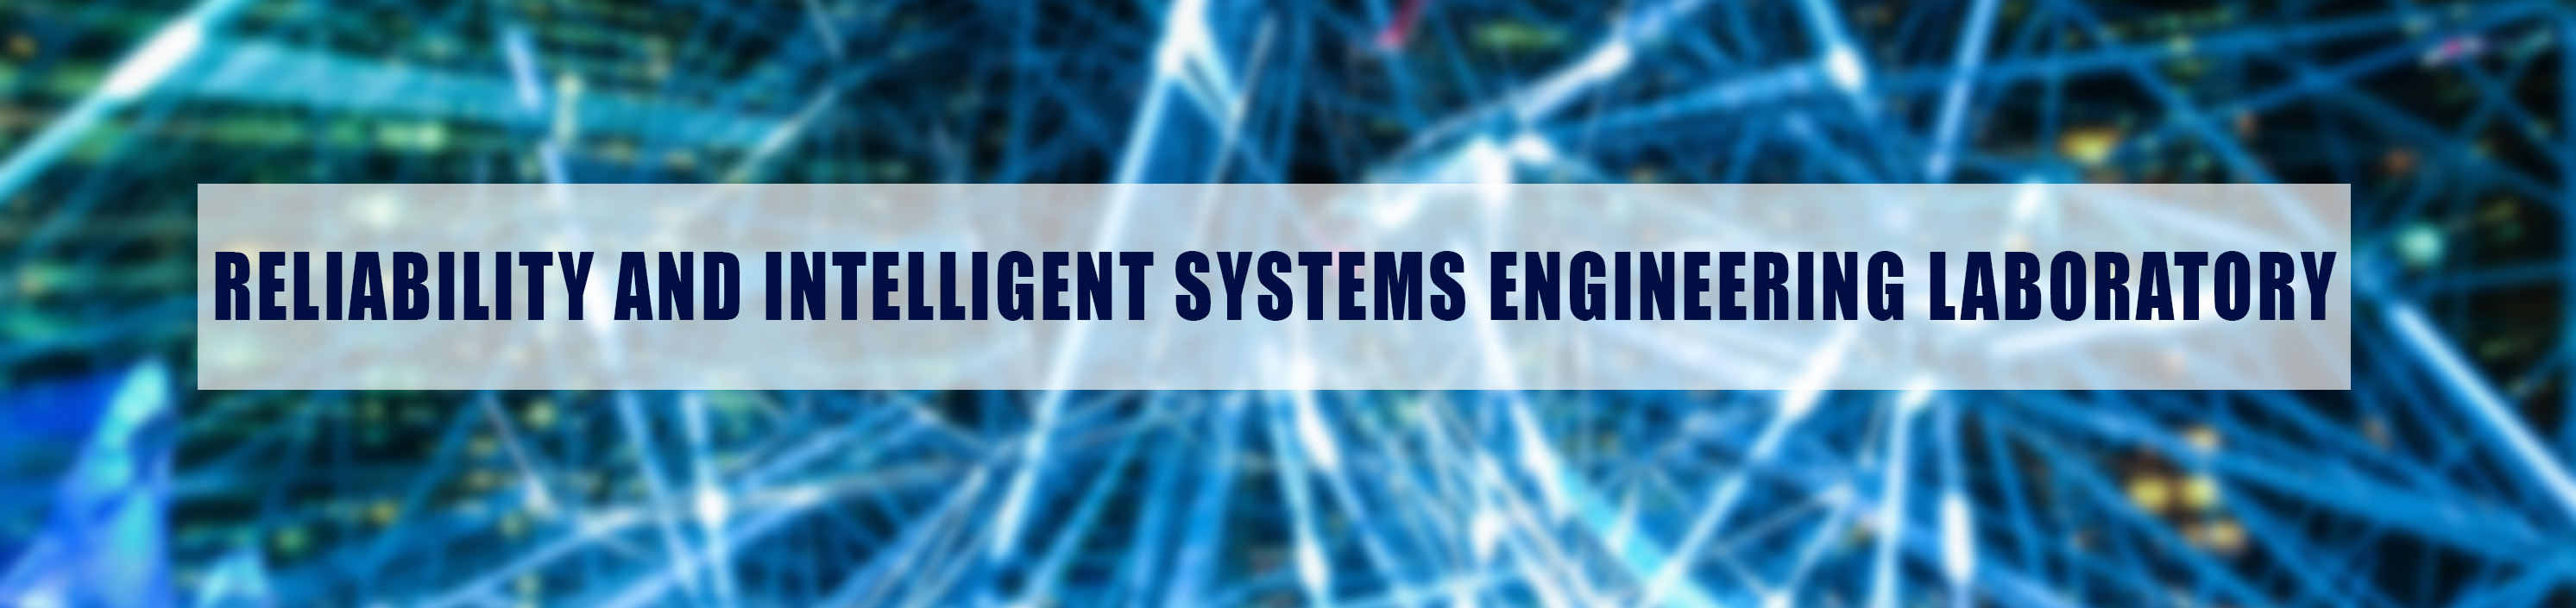 Reliability and Intelligent Systems Engineering main logo image